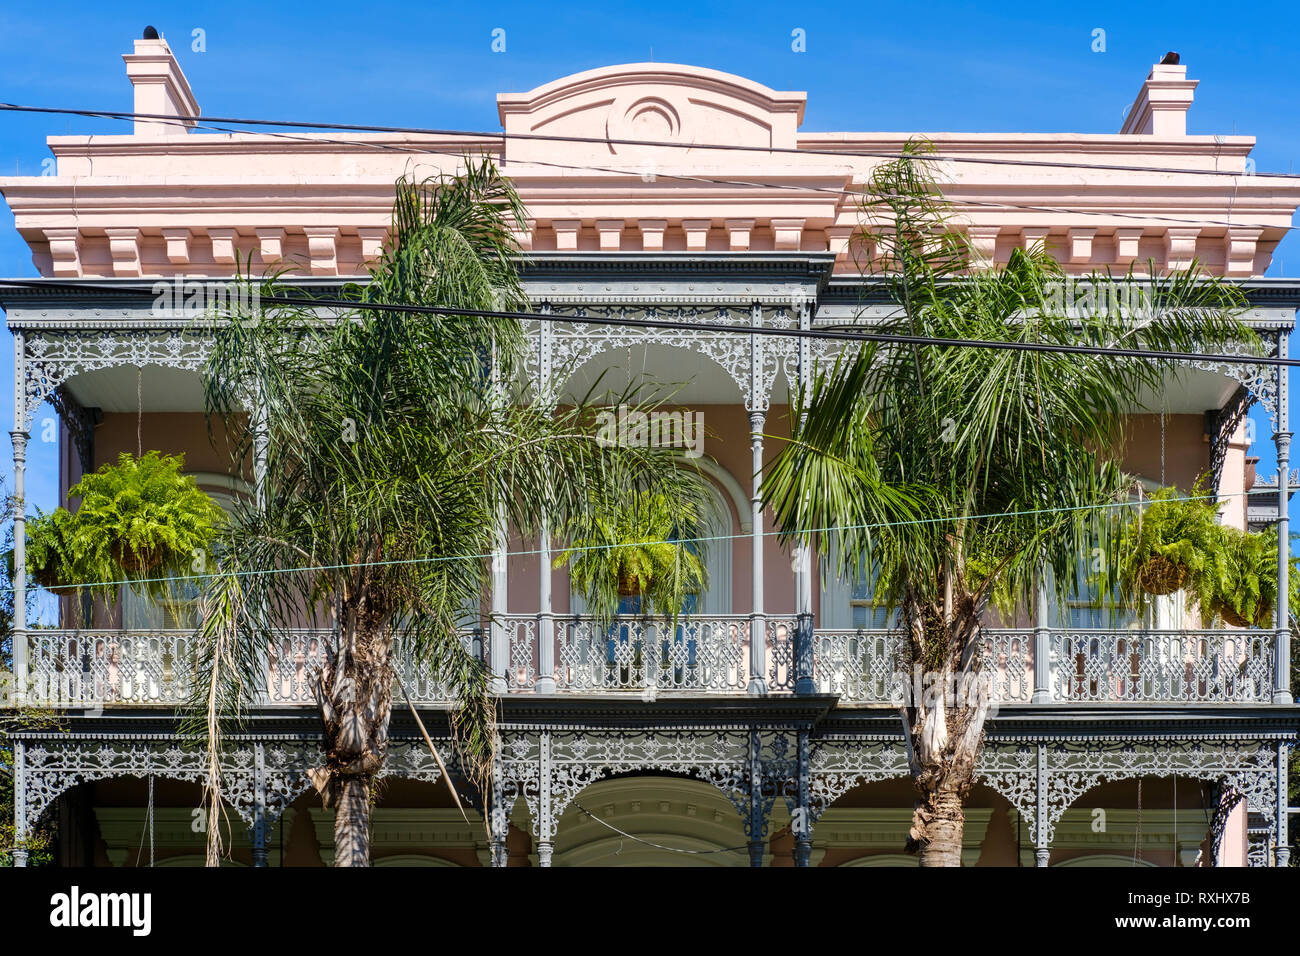 Ornate facade, Carroll-Crawford House, three-story Italianate colonial house, cast-iron balconies and fence, Garden District, NOLA, New Orleans, USA. Stock Photo